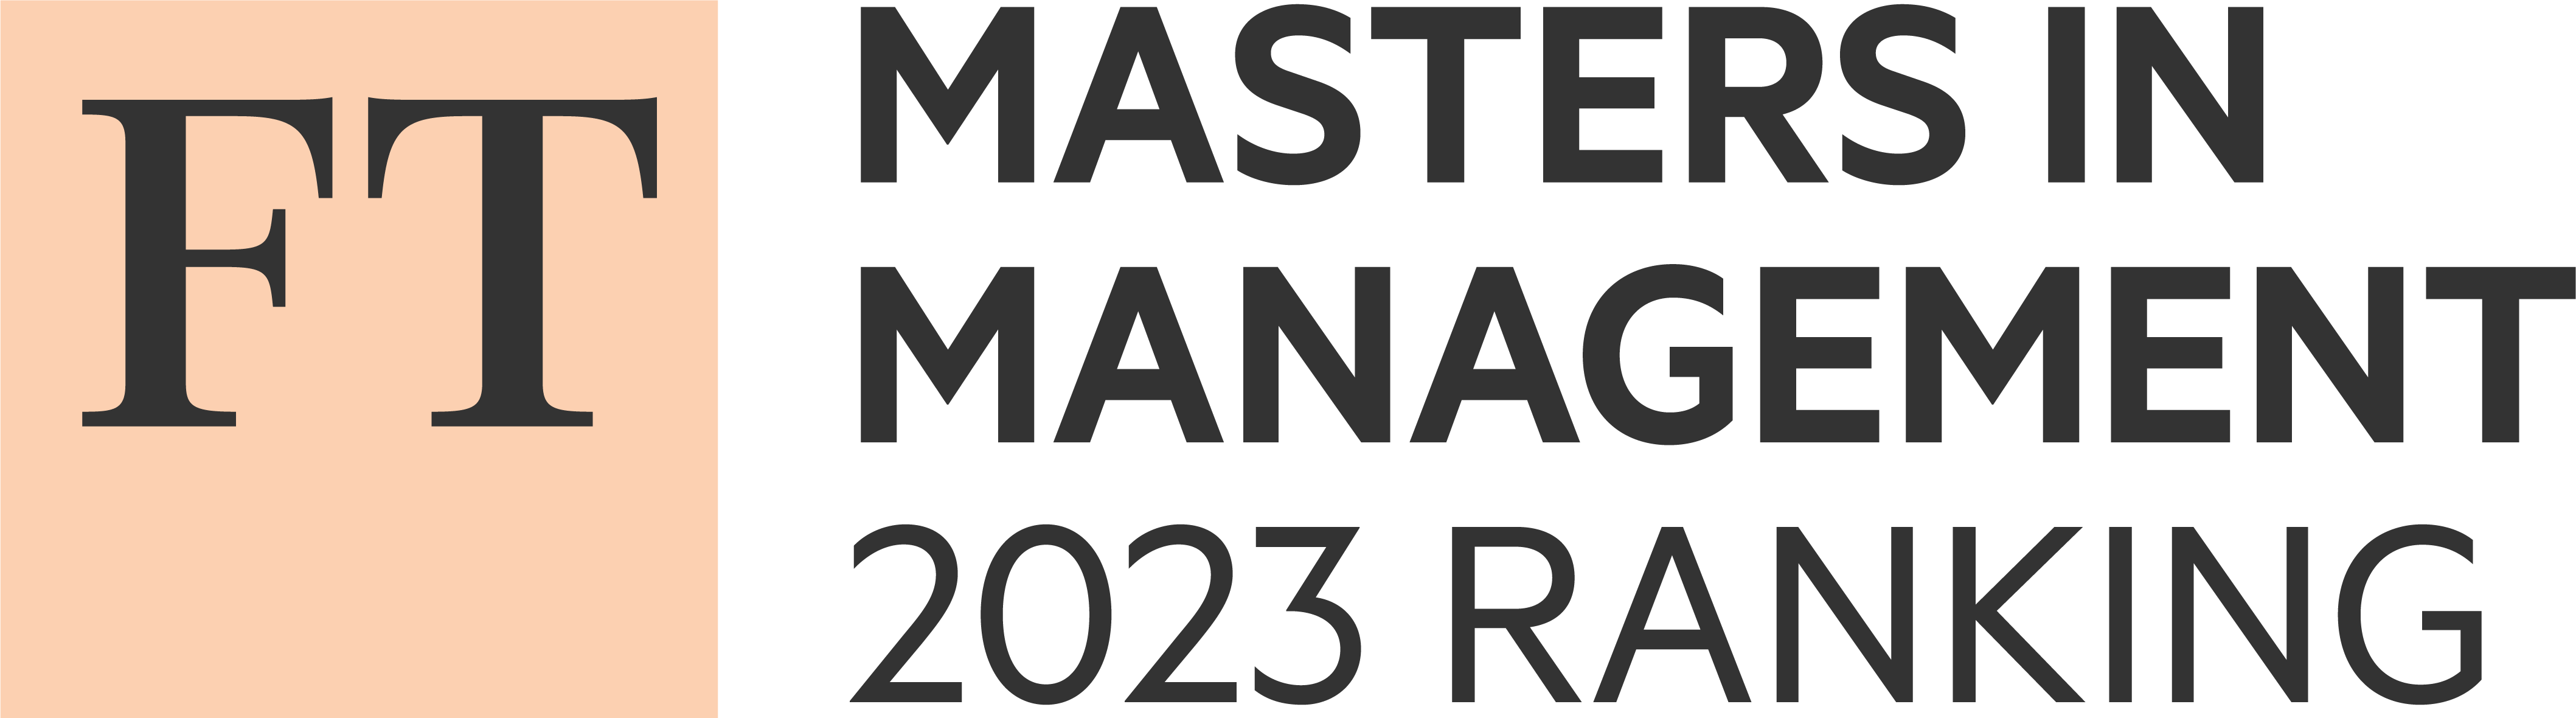 financial times masters in management 2023